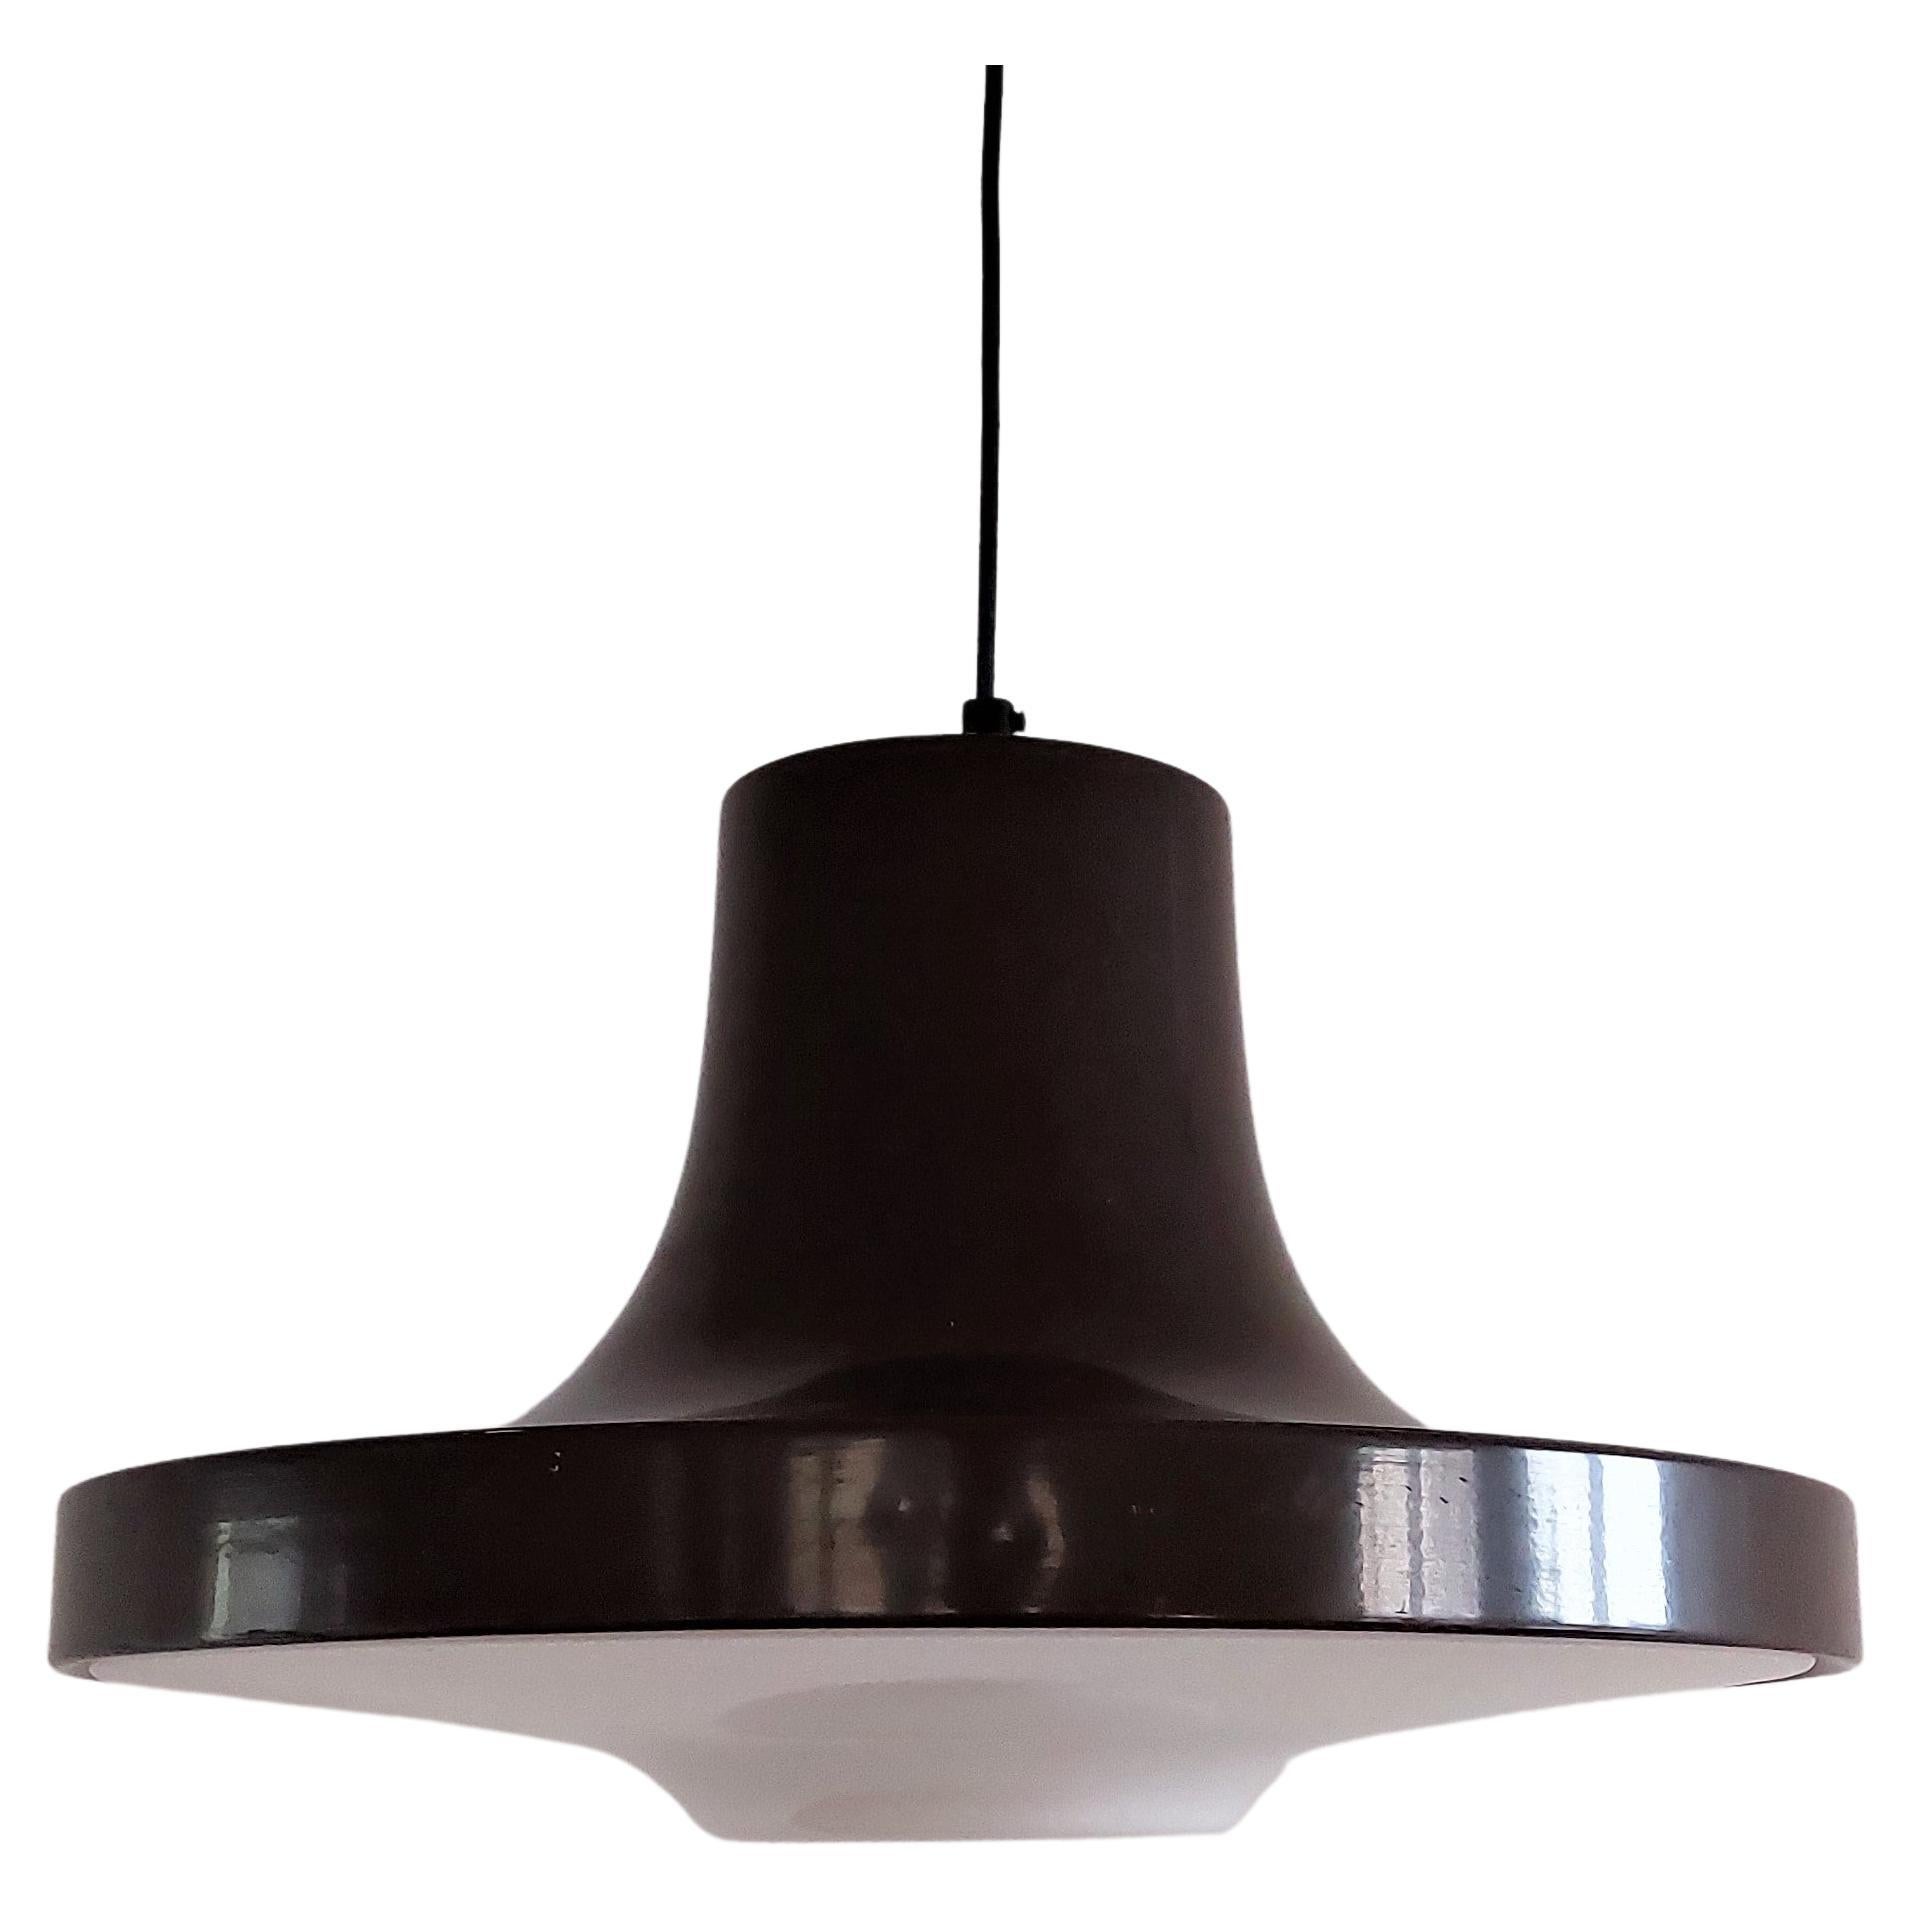 Brown Metal Pendant Lamp with Perspex Diffuser for Ab Fagerhult, Sweden